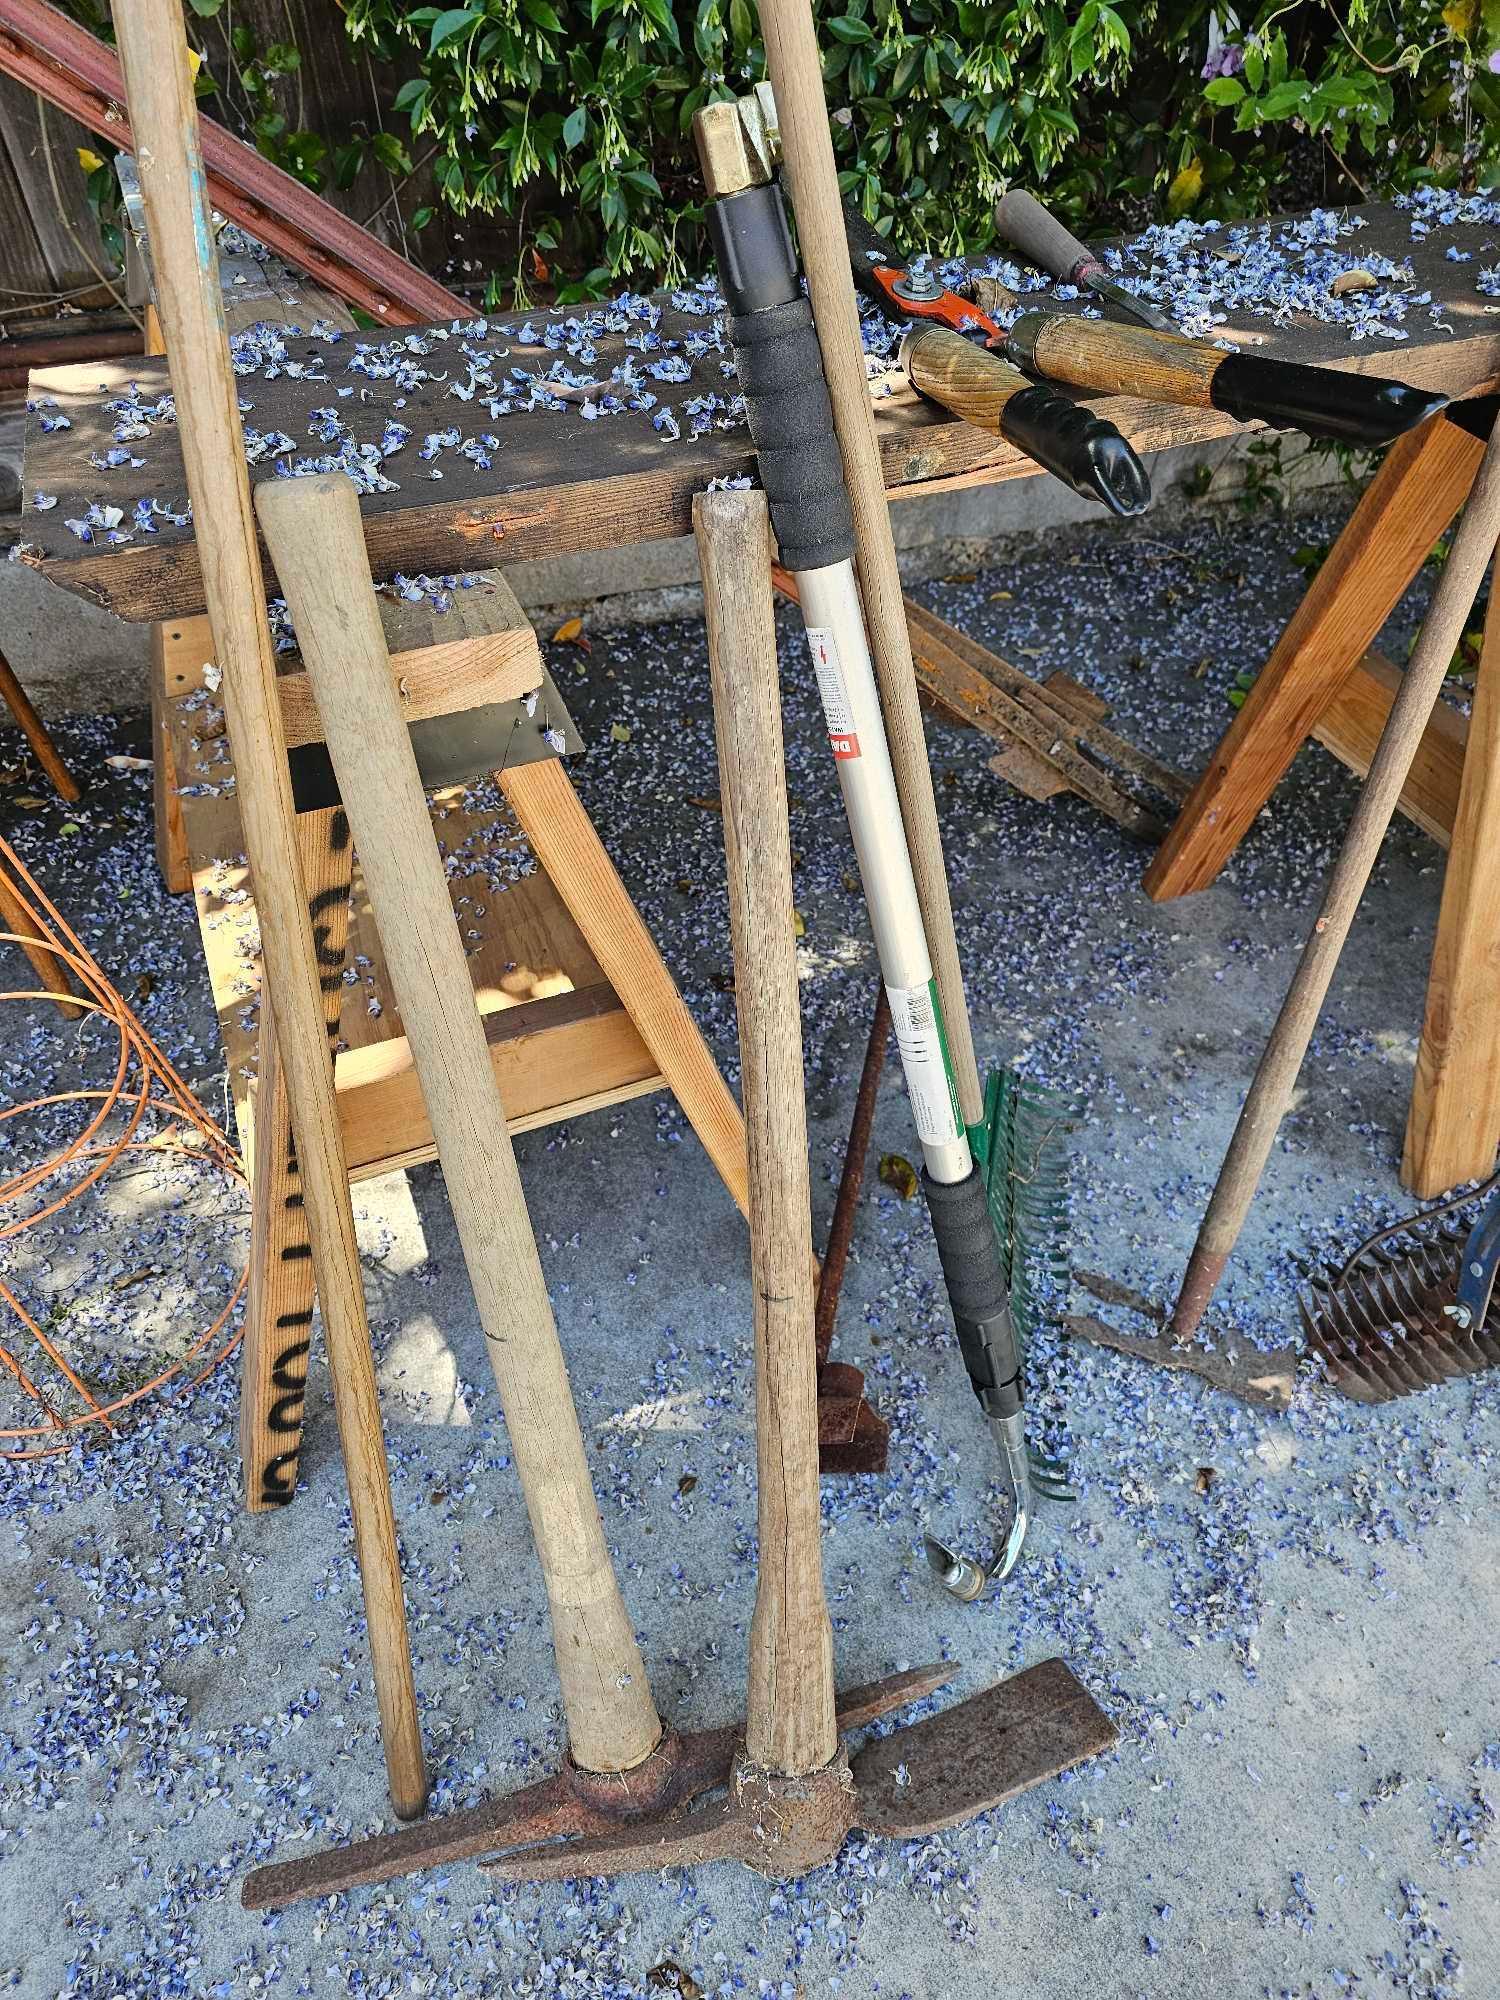 LARGE GROUP OF OUTDOOR SHOVELS